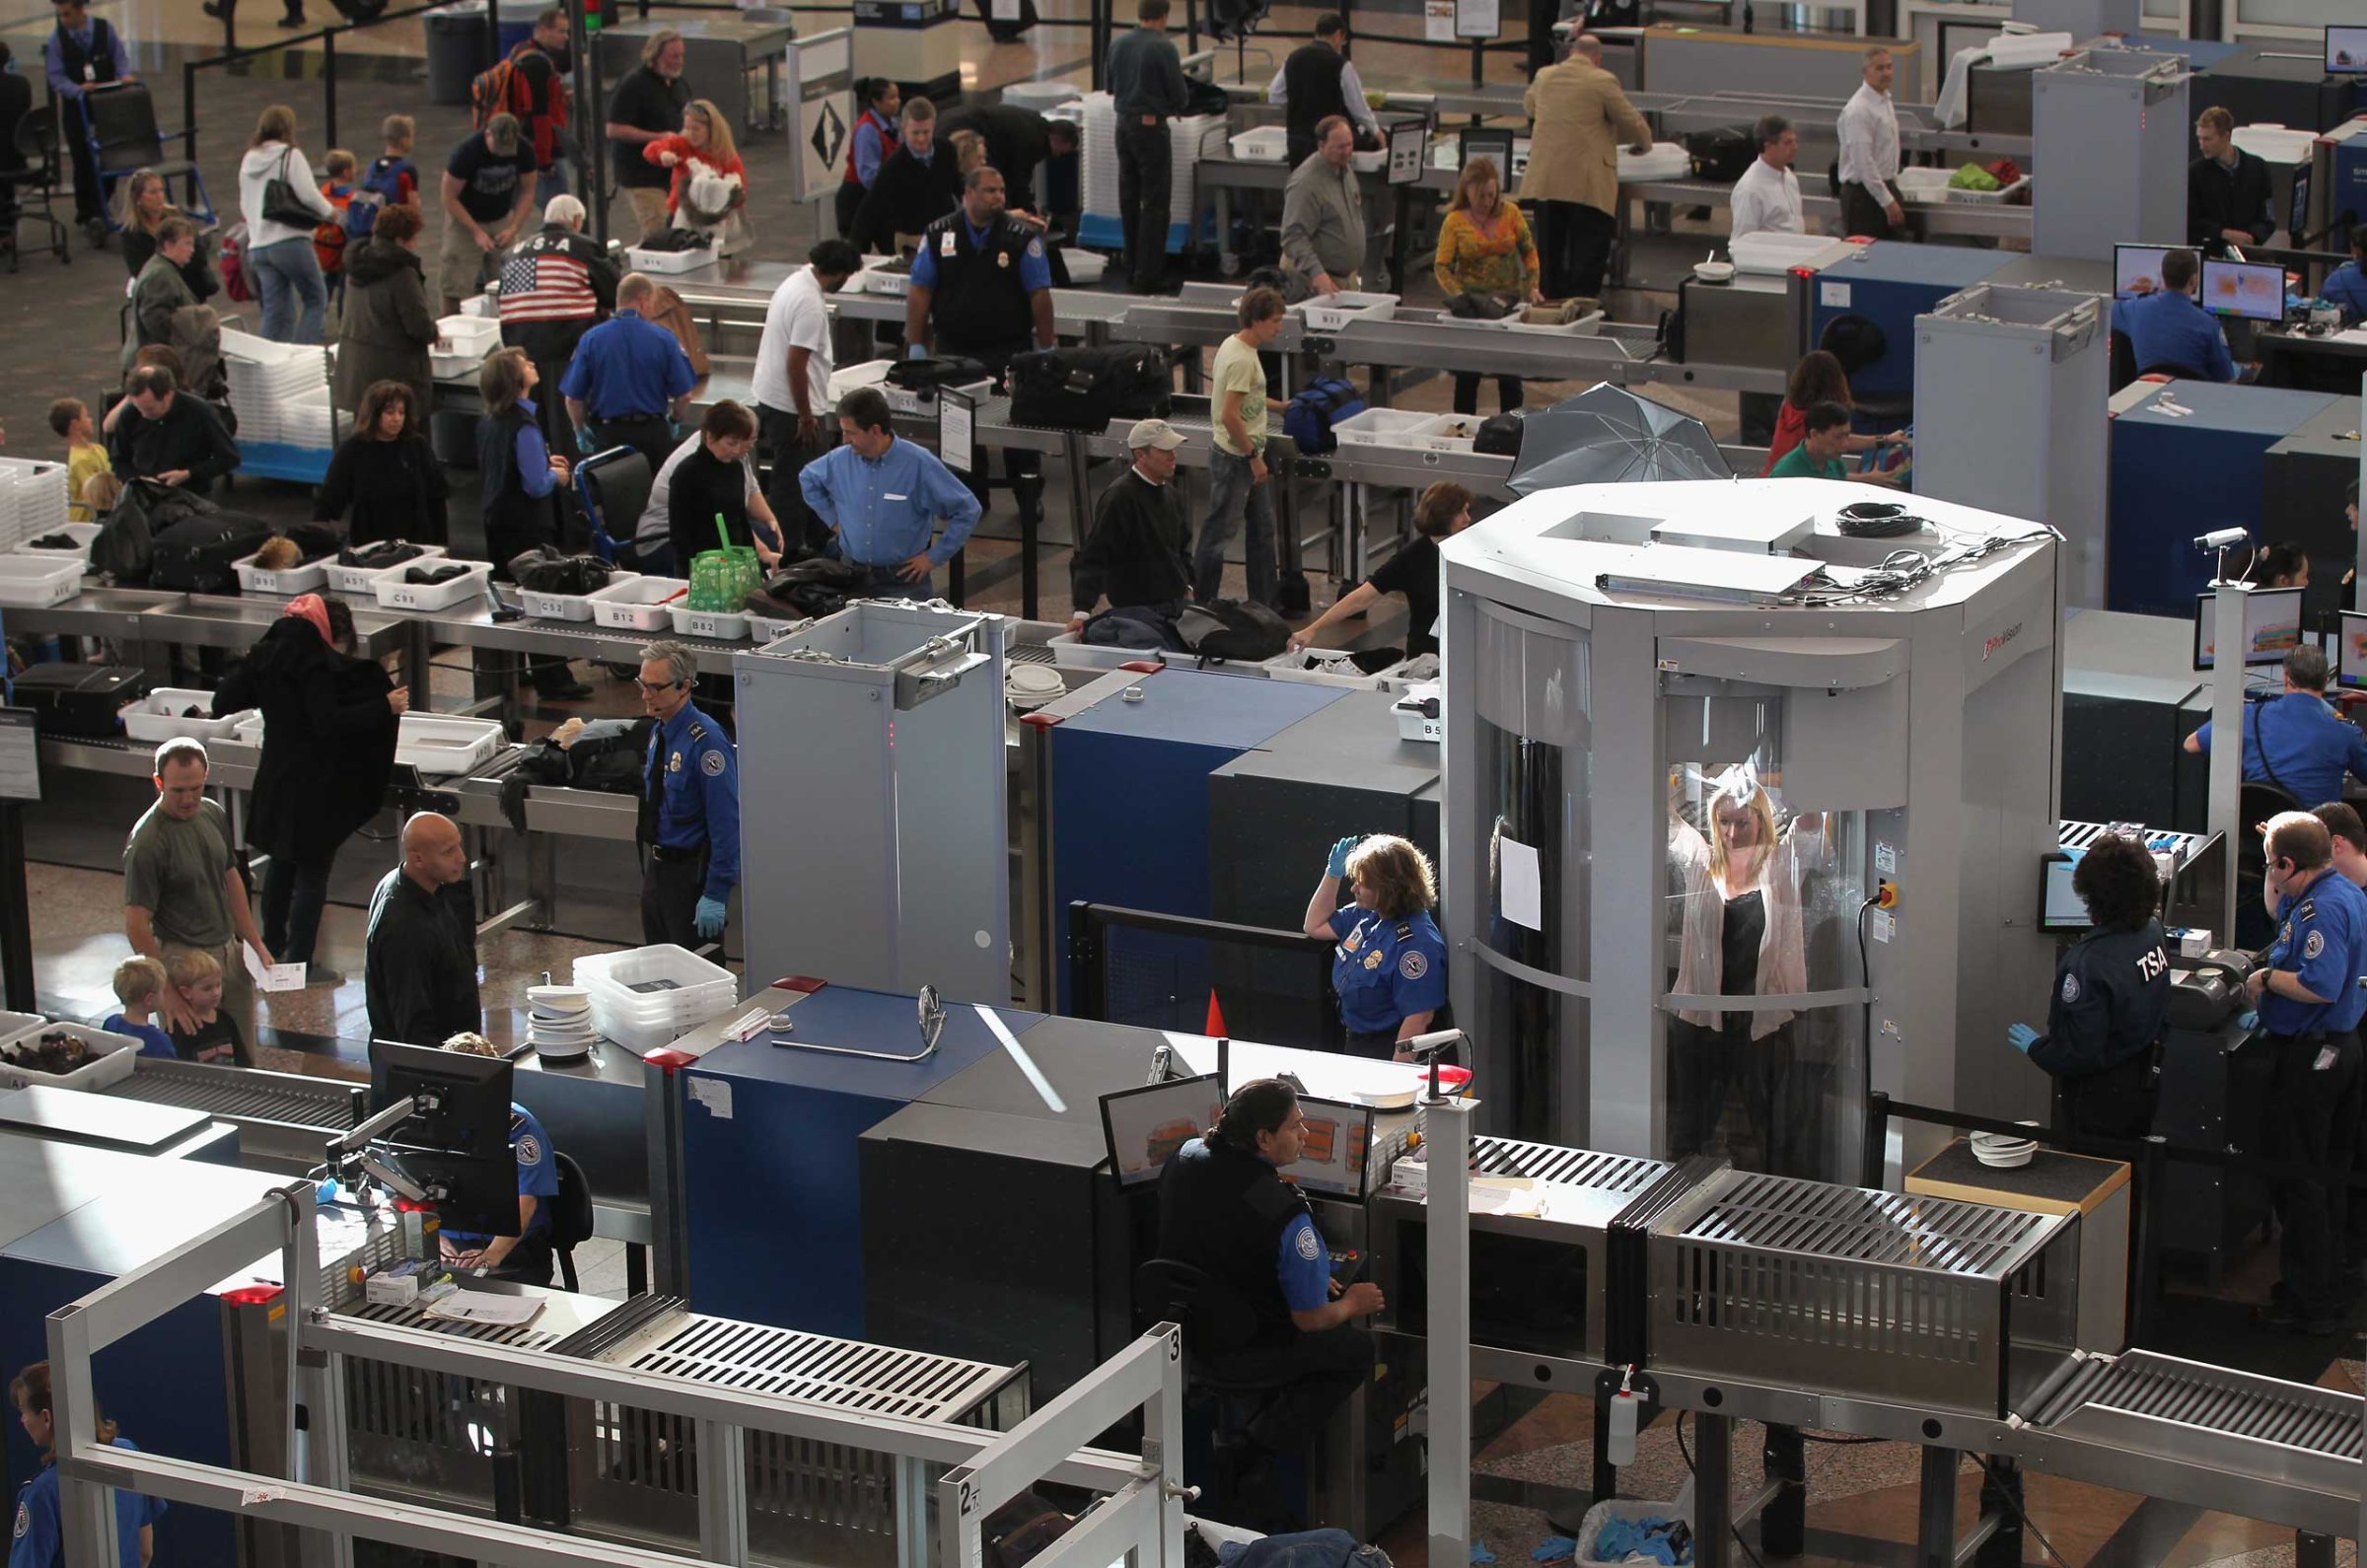 Transportation Security Administration agents screen passengers at Denver International Airport in 2010.